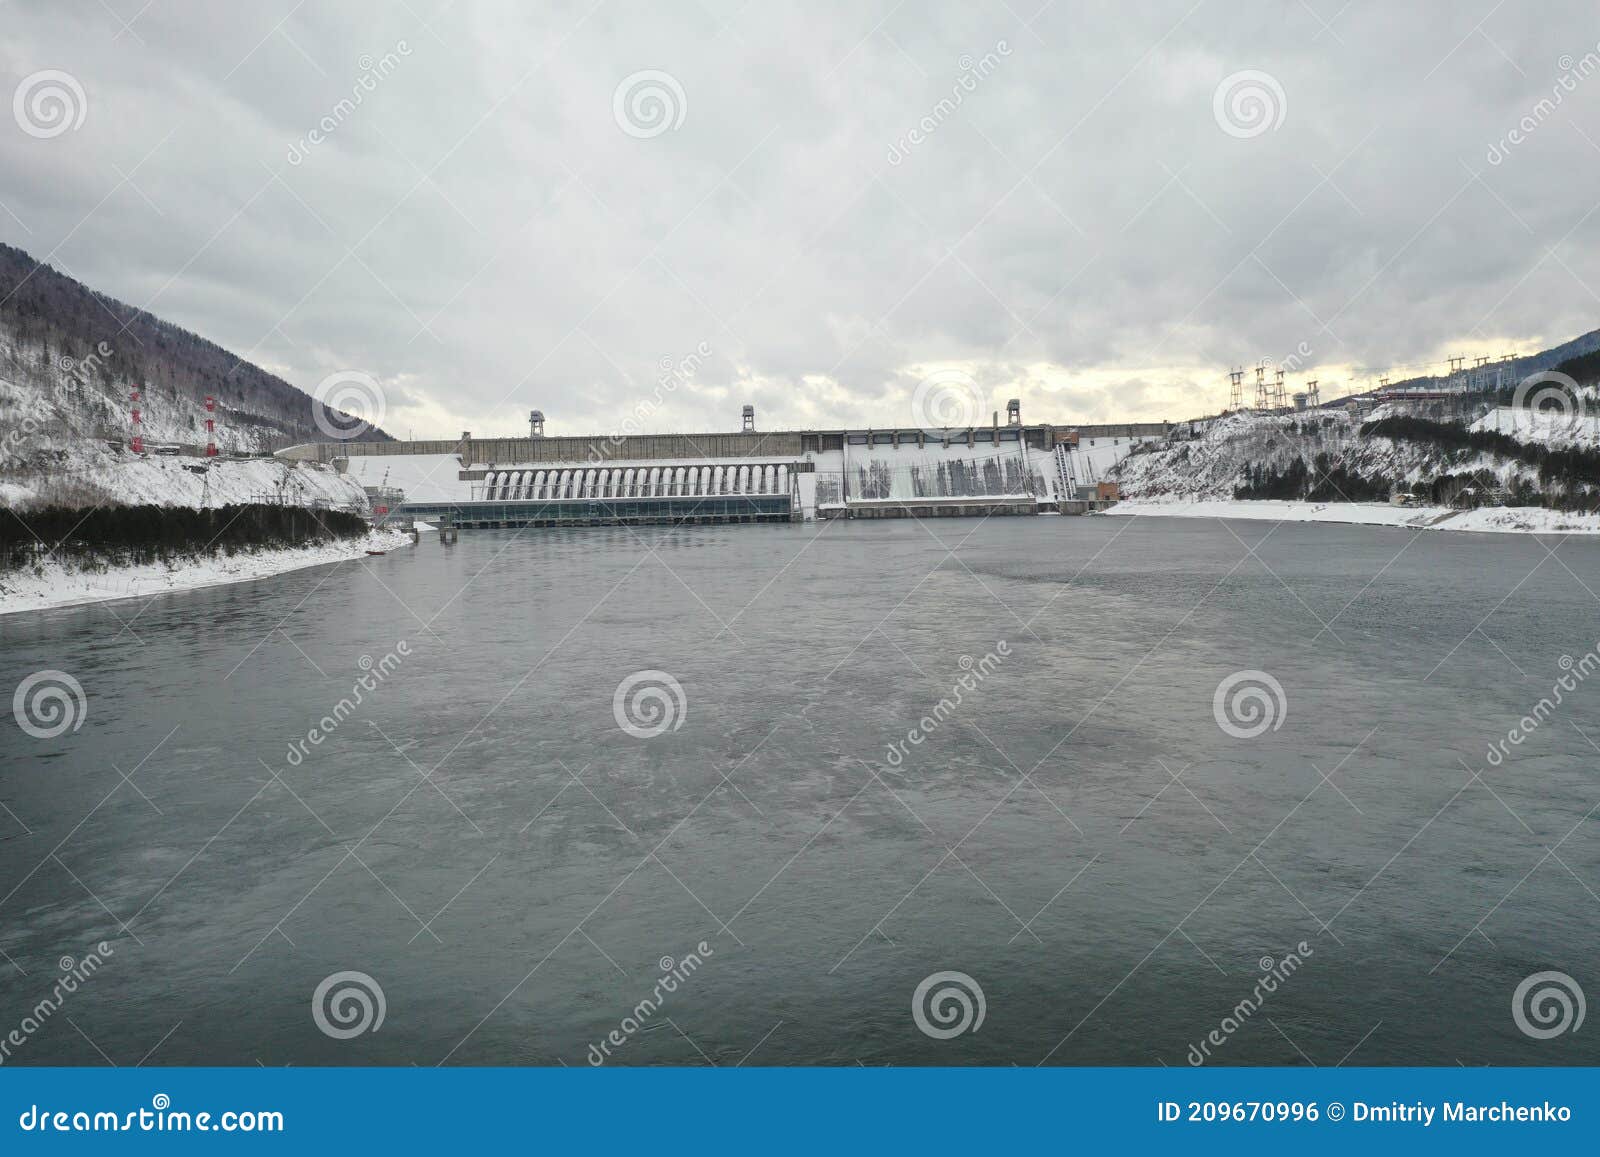 Krasnoyarsk Dam and Power Plant on Enisey River from Aerial View